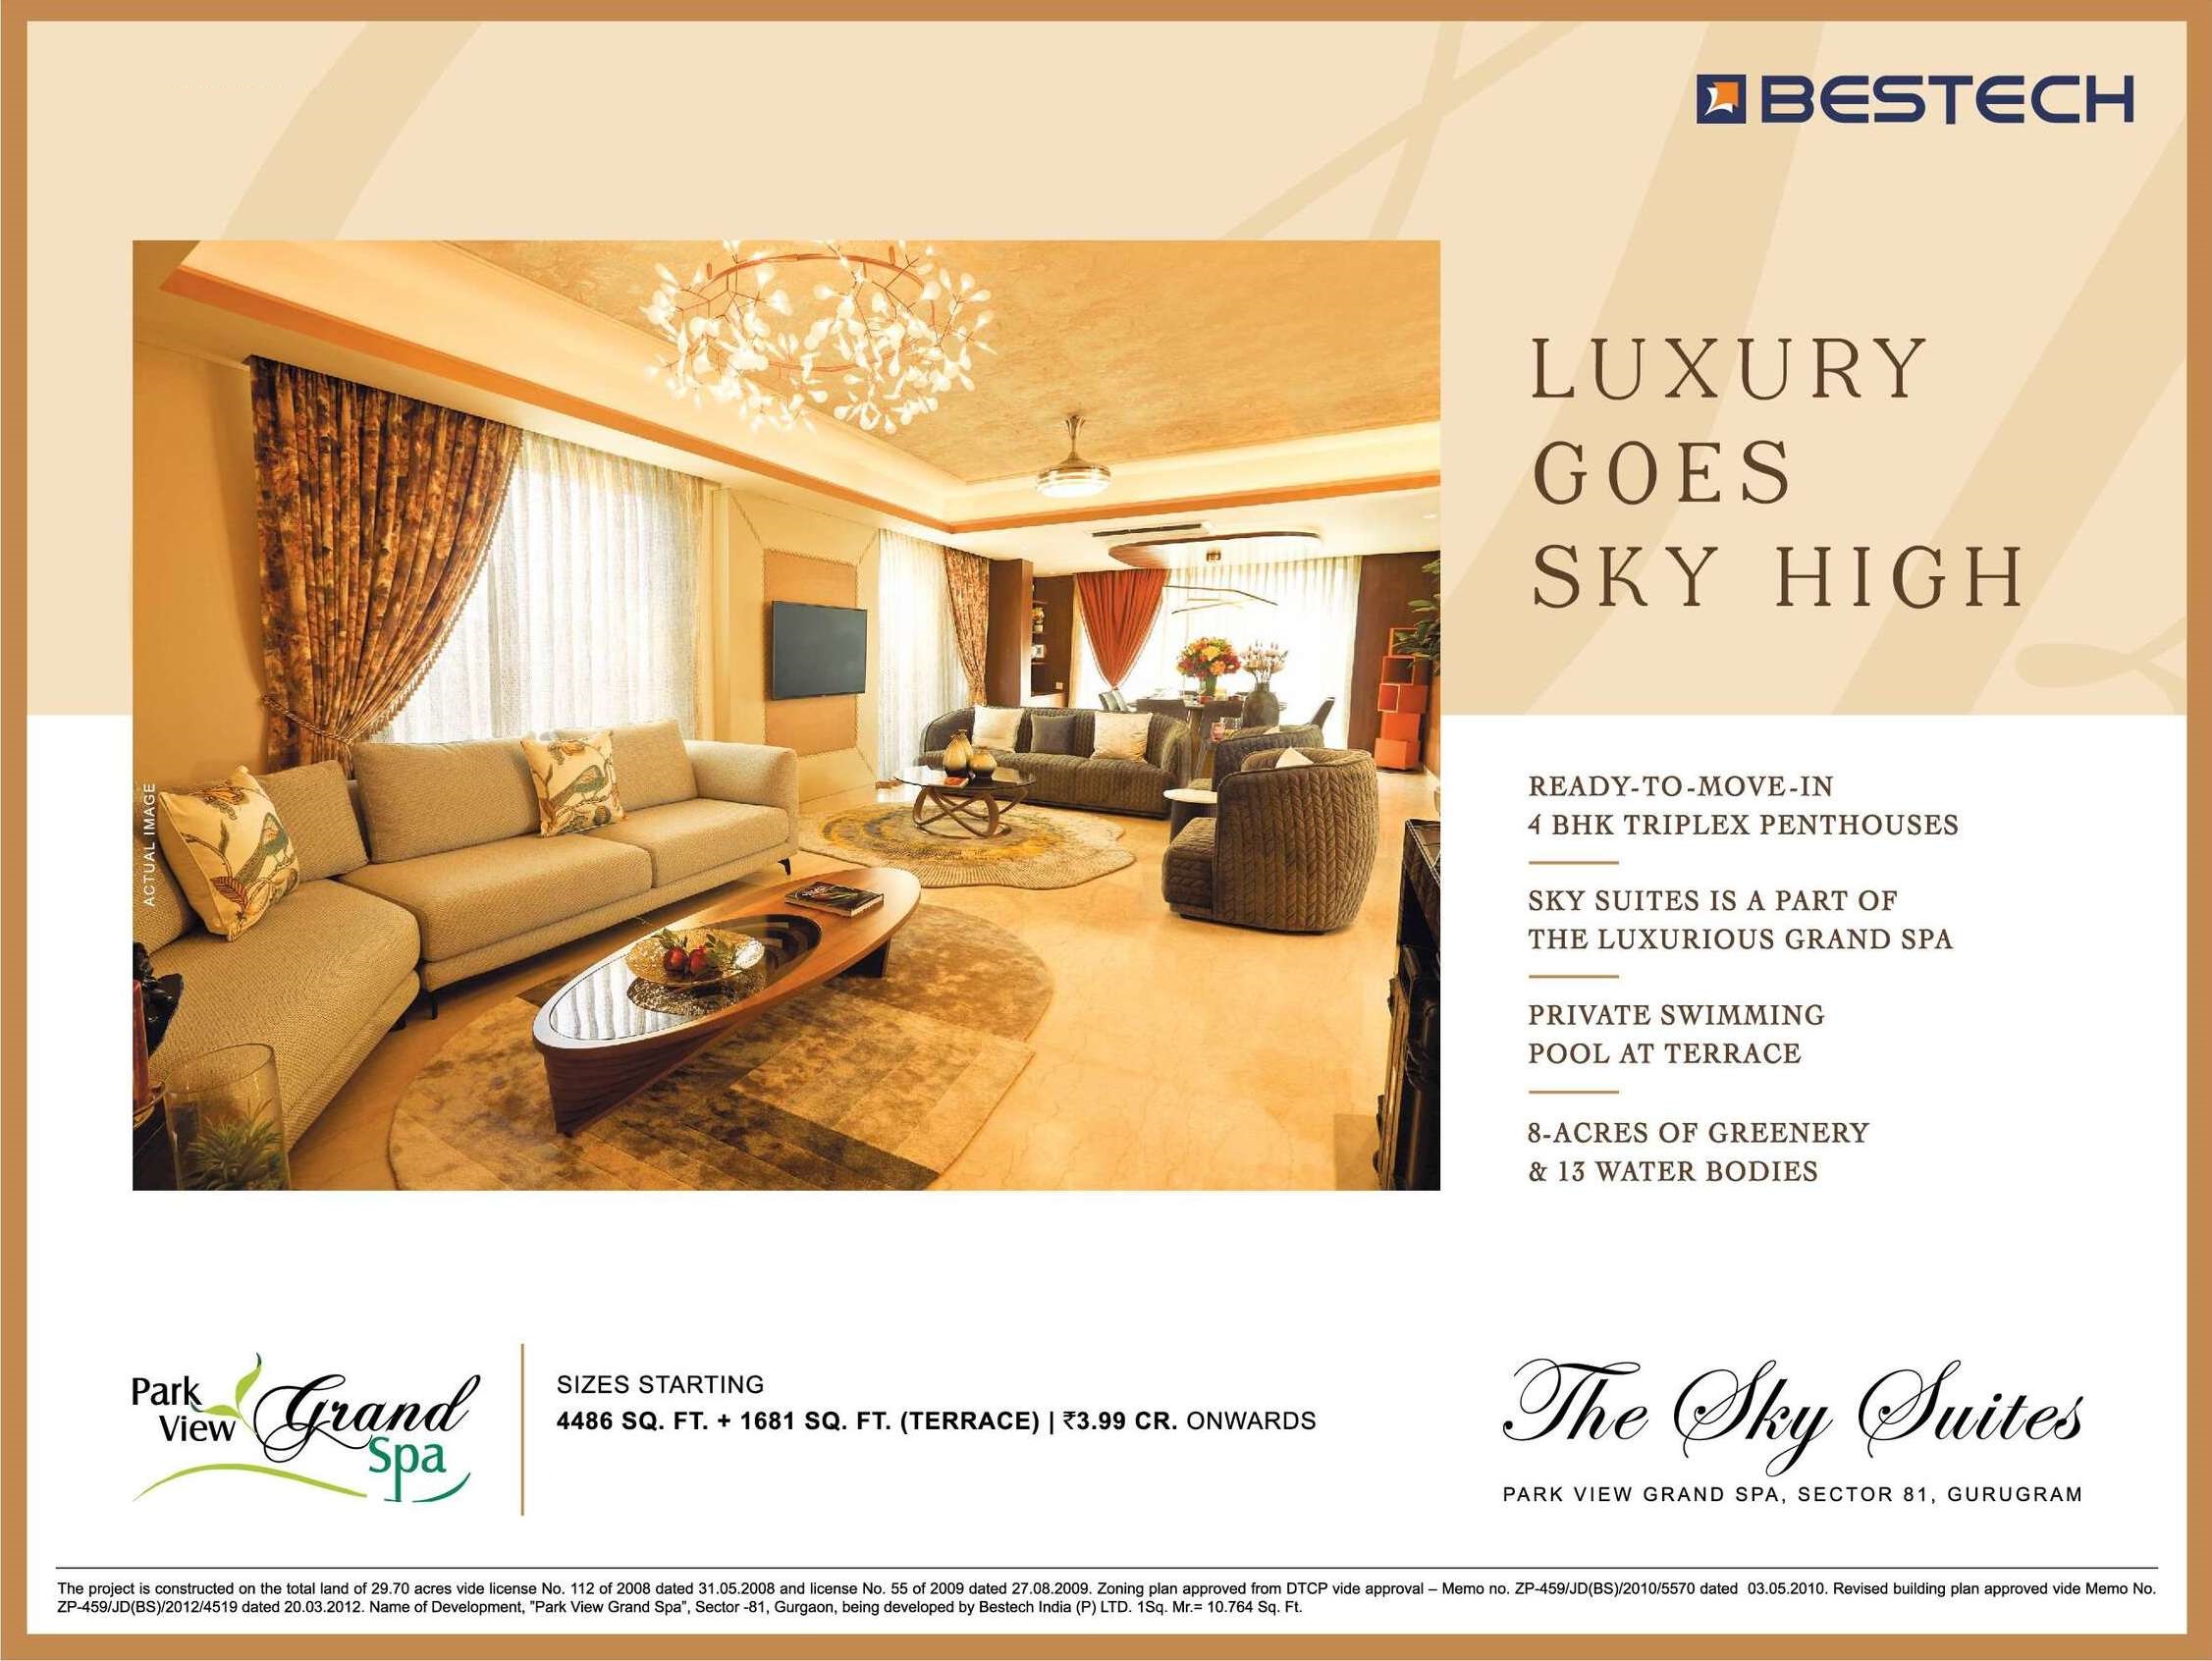 Ready to move in 4 BHK triplex penthouses at Bestech Park View Grand Spa, Gurgaon Update